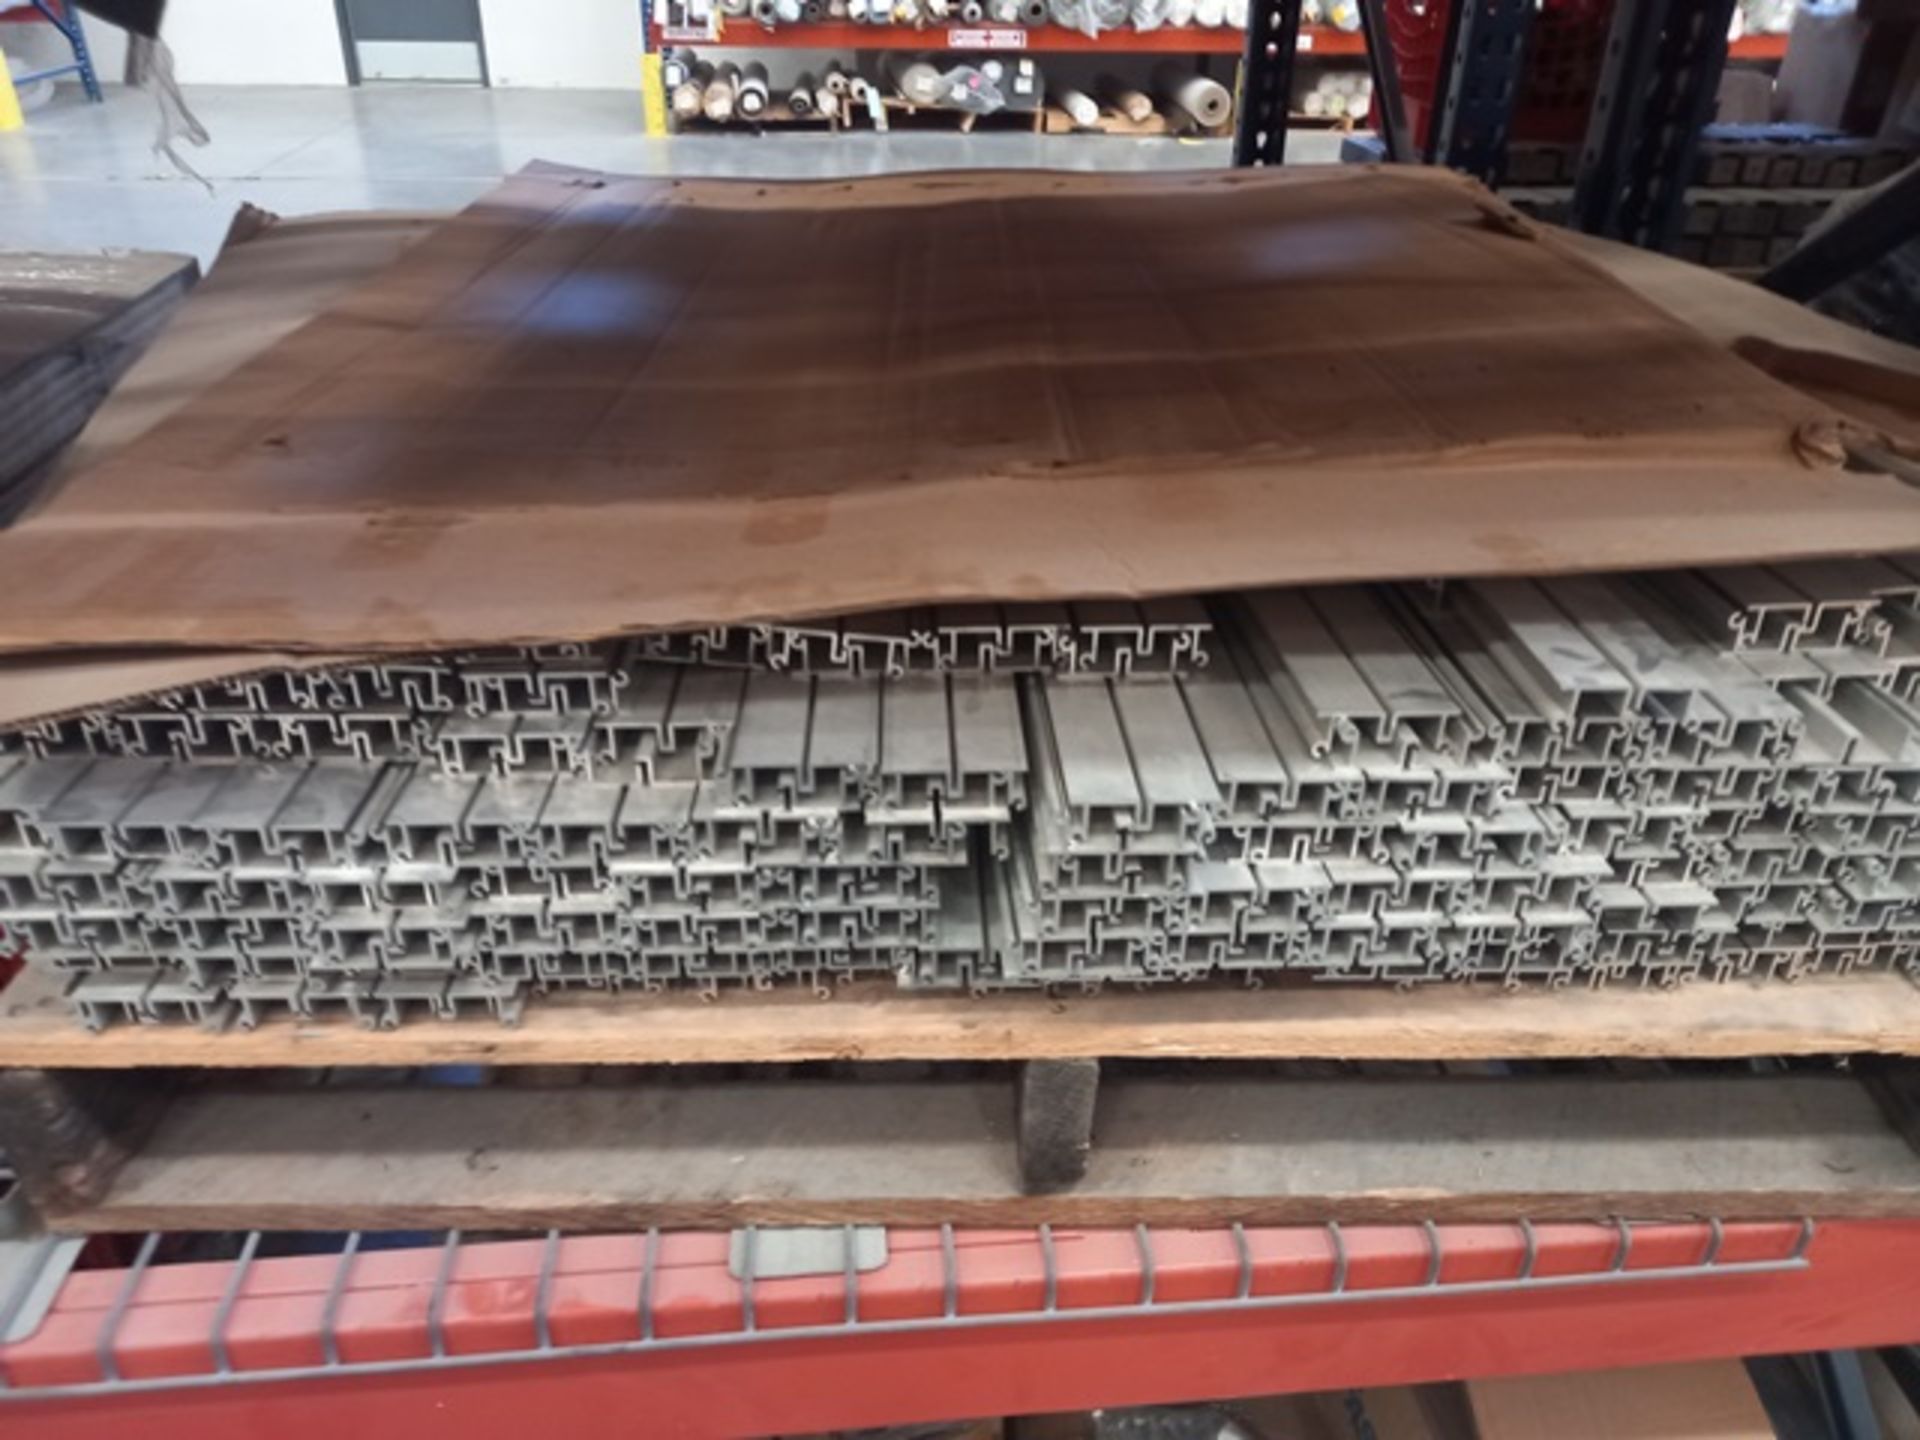 LOT: Miscellaneous Materials: Approximately (84,000) Pieces Of Materials For The Manufacture Of - Image 17 of 54